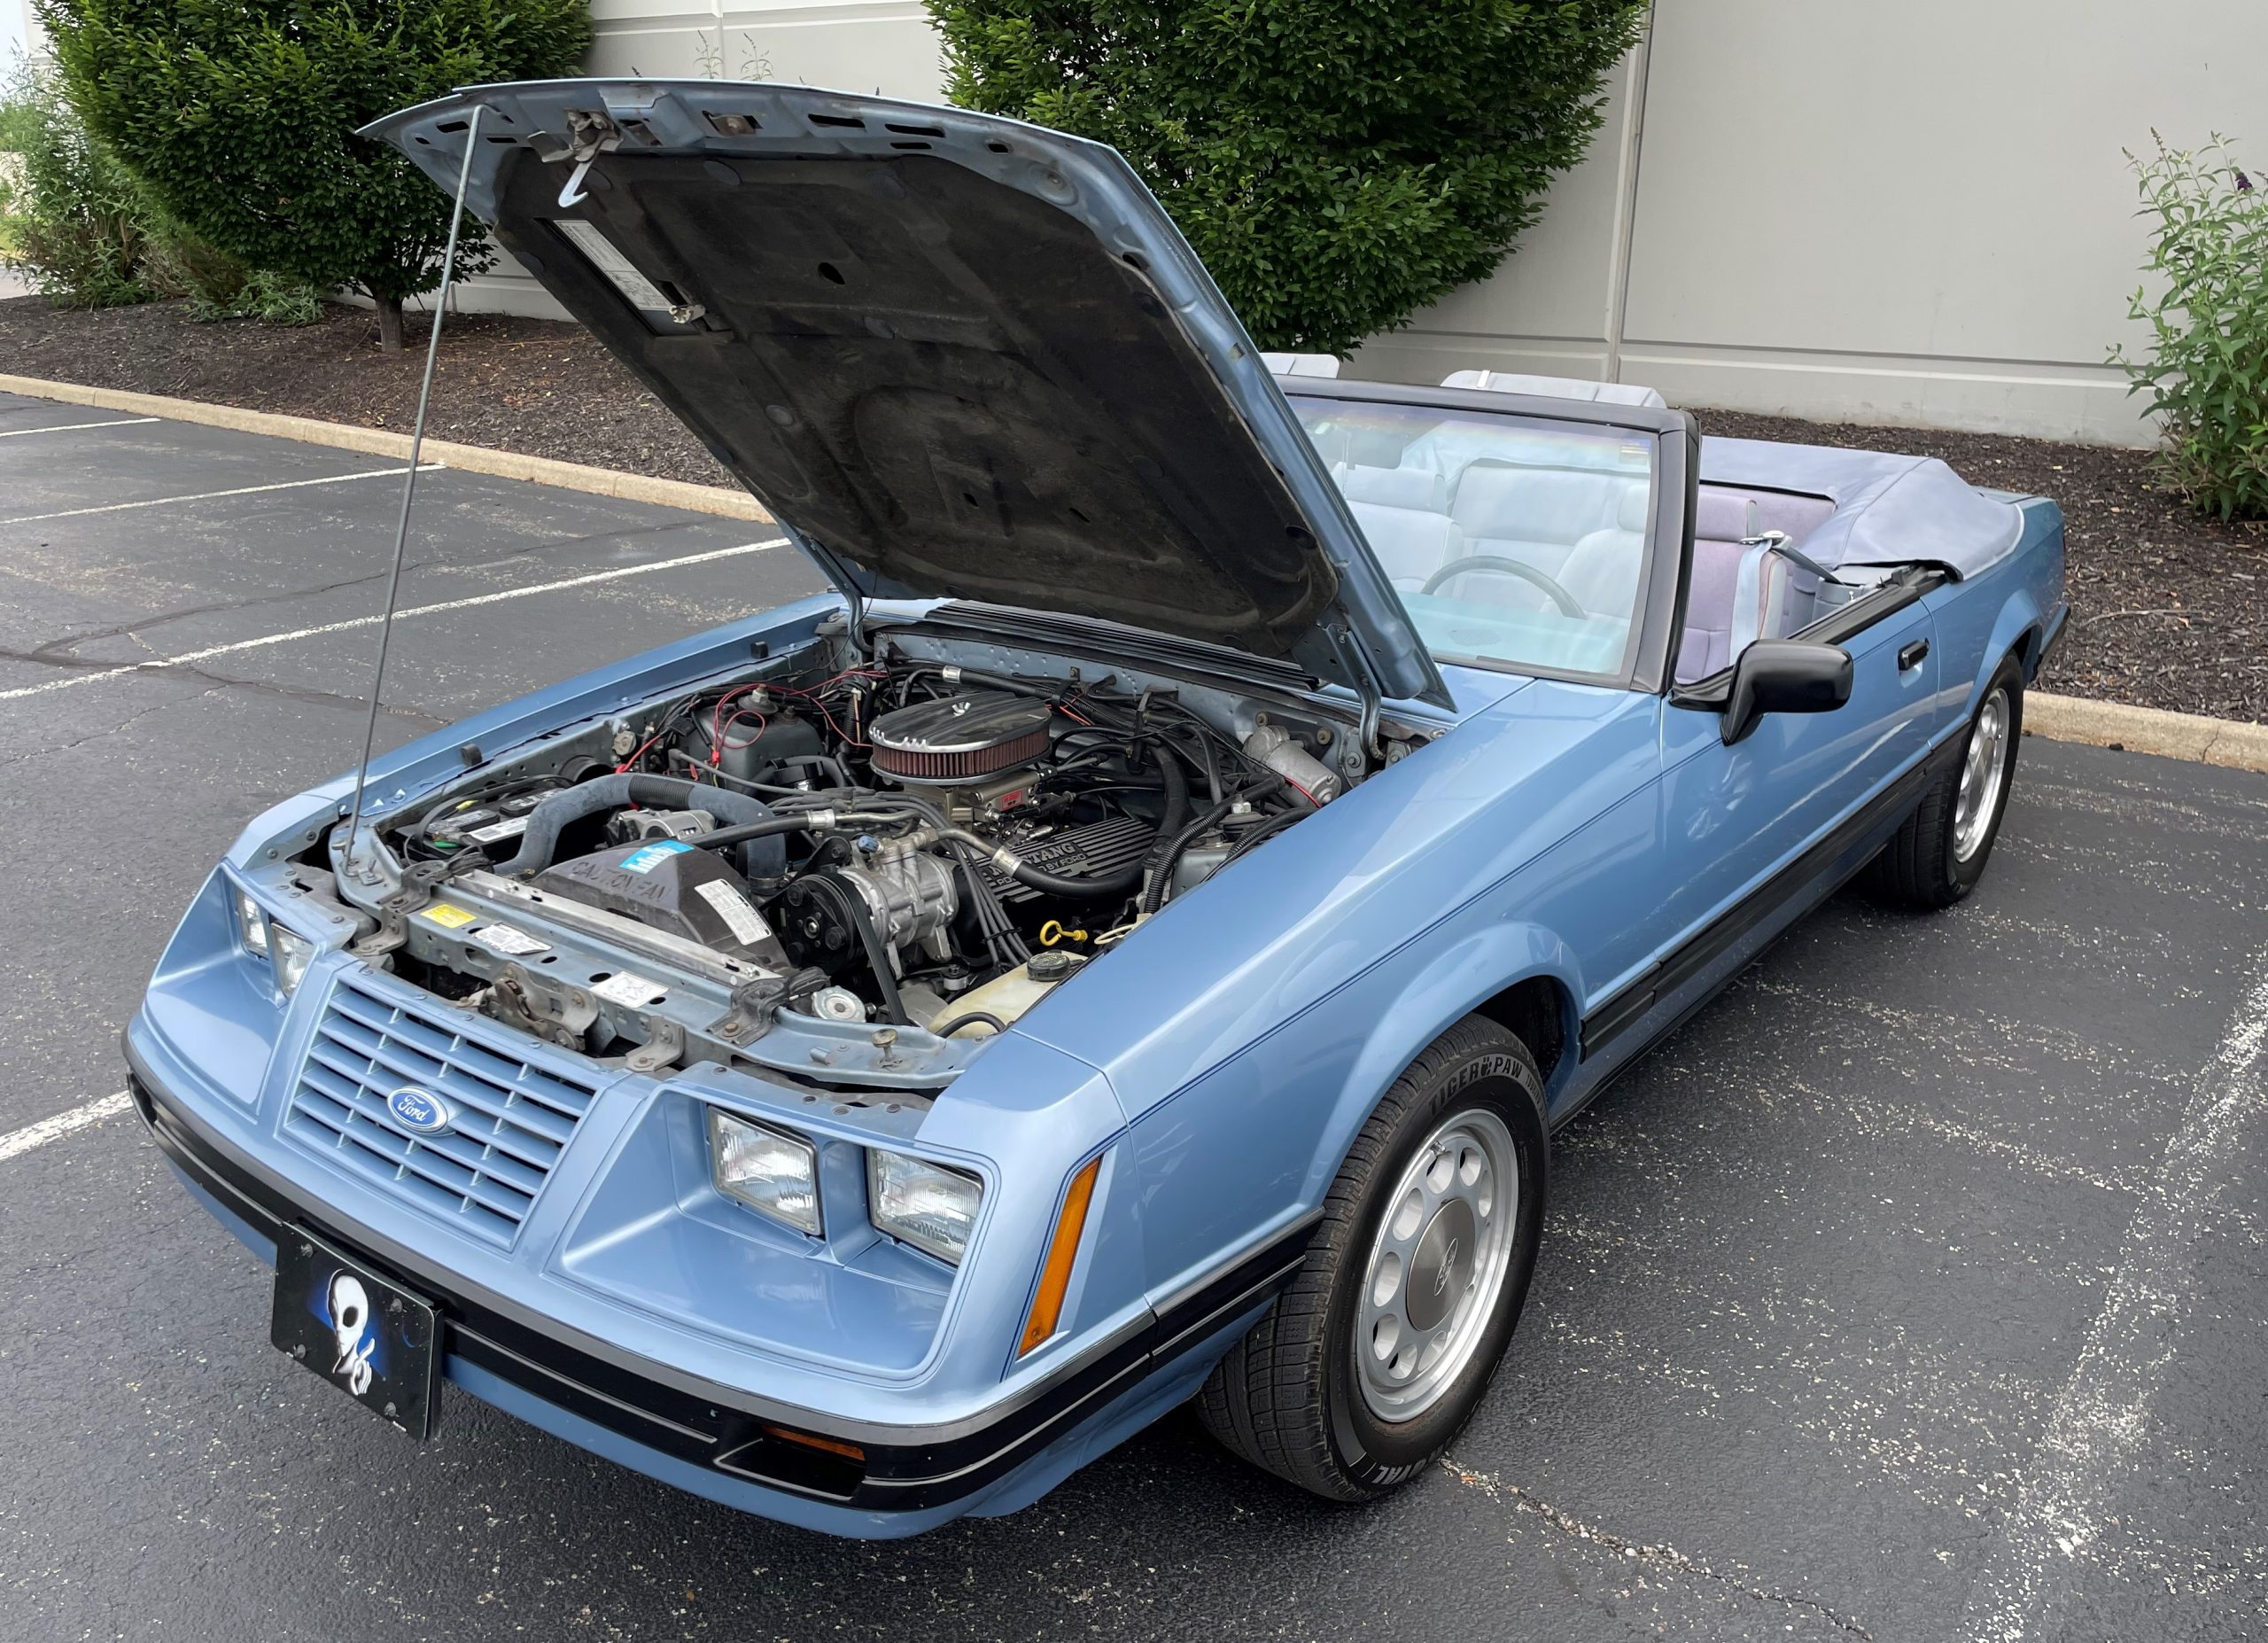 Ford Mustang Foxbody Lx Convertible 5.0L Scaled 